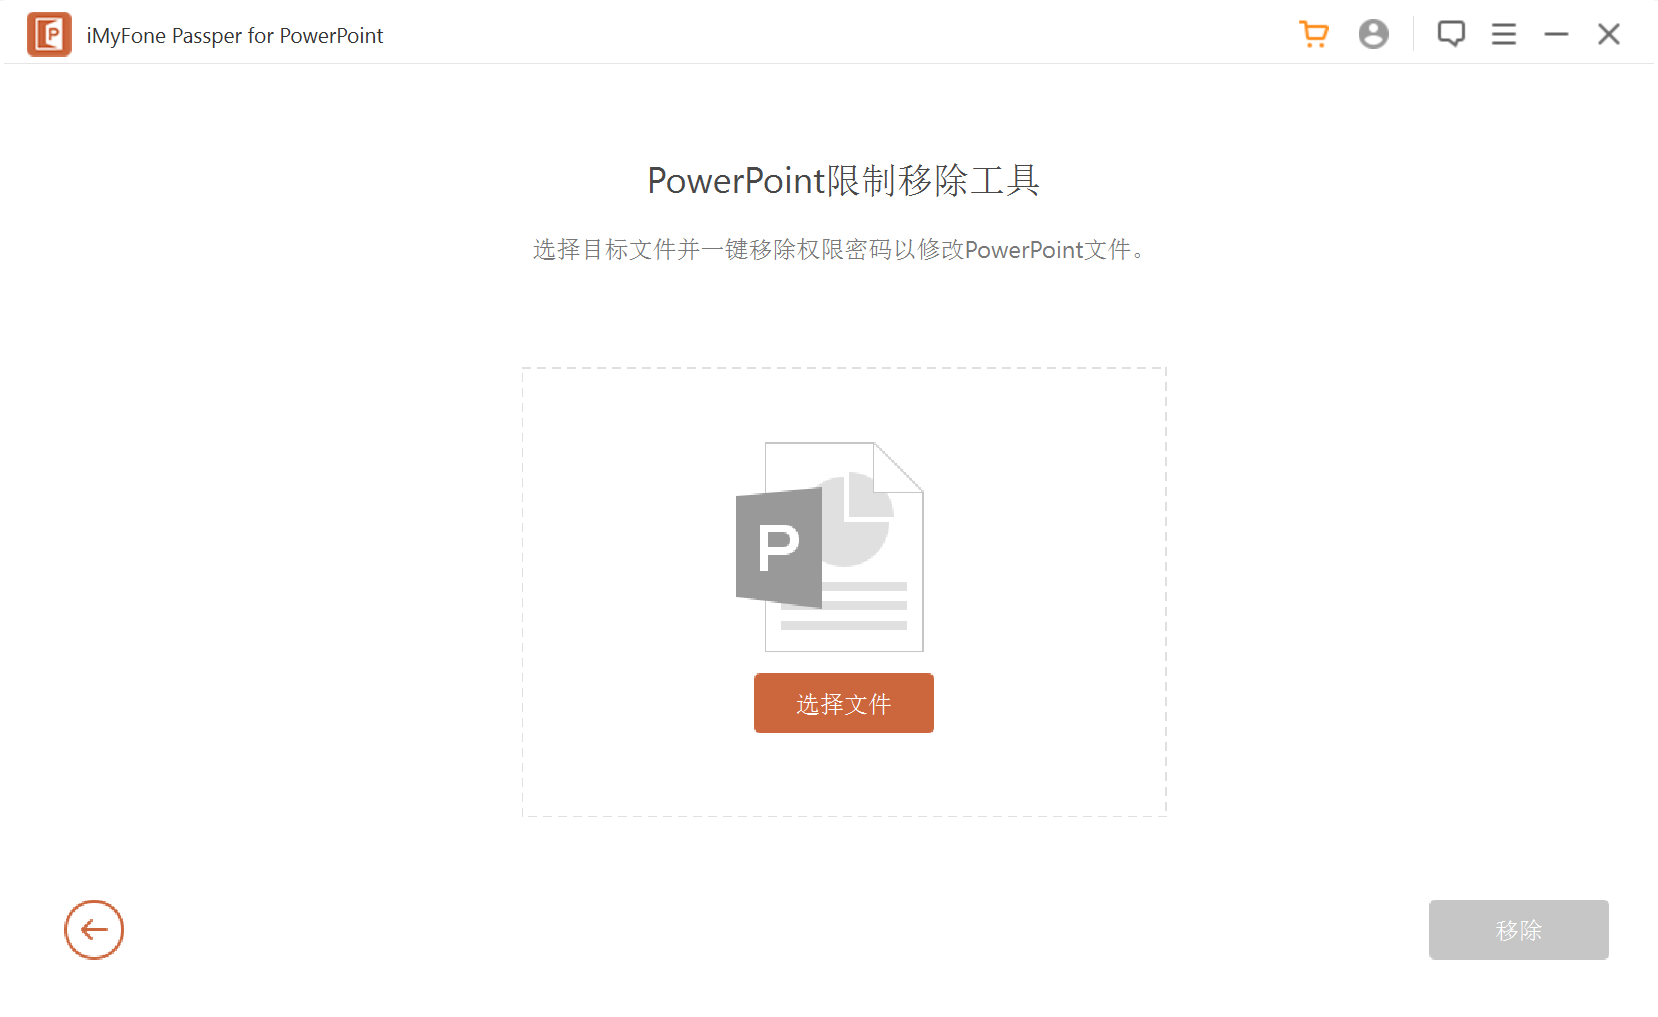 Passper for PowerPoint 破解版.png